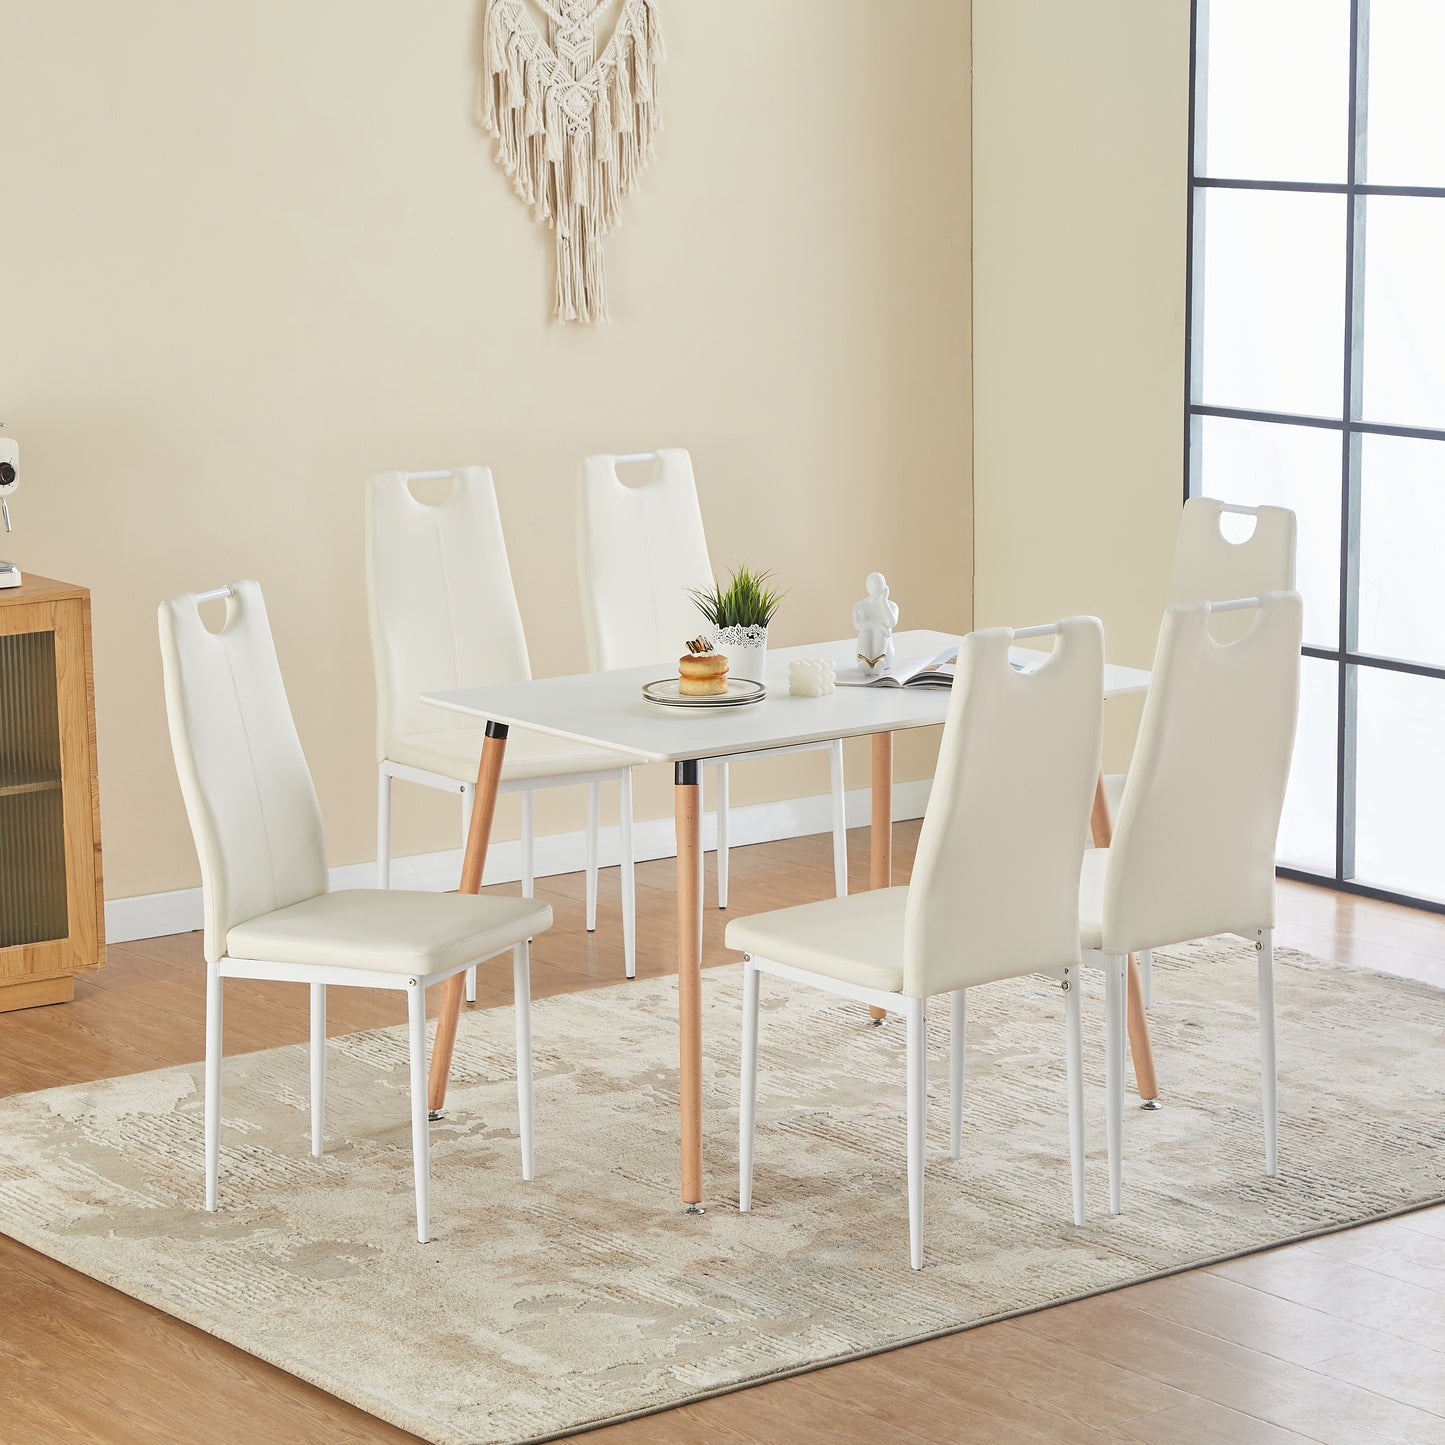 ANN-HANDLE Upholstered Dining Chair with Iron Legs - White